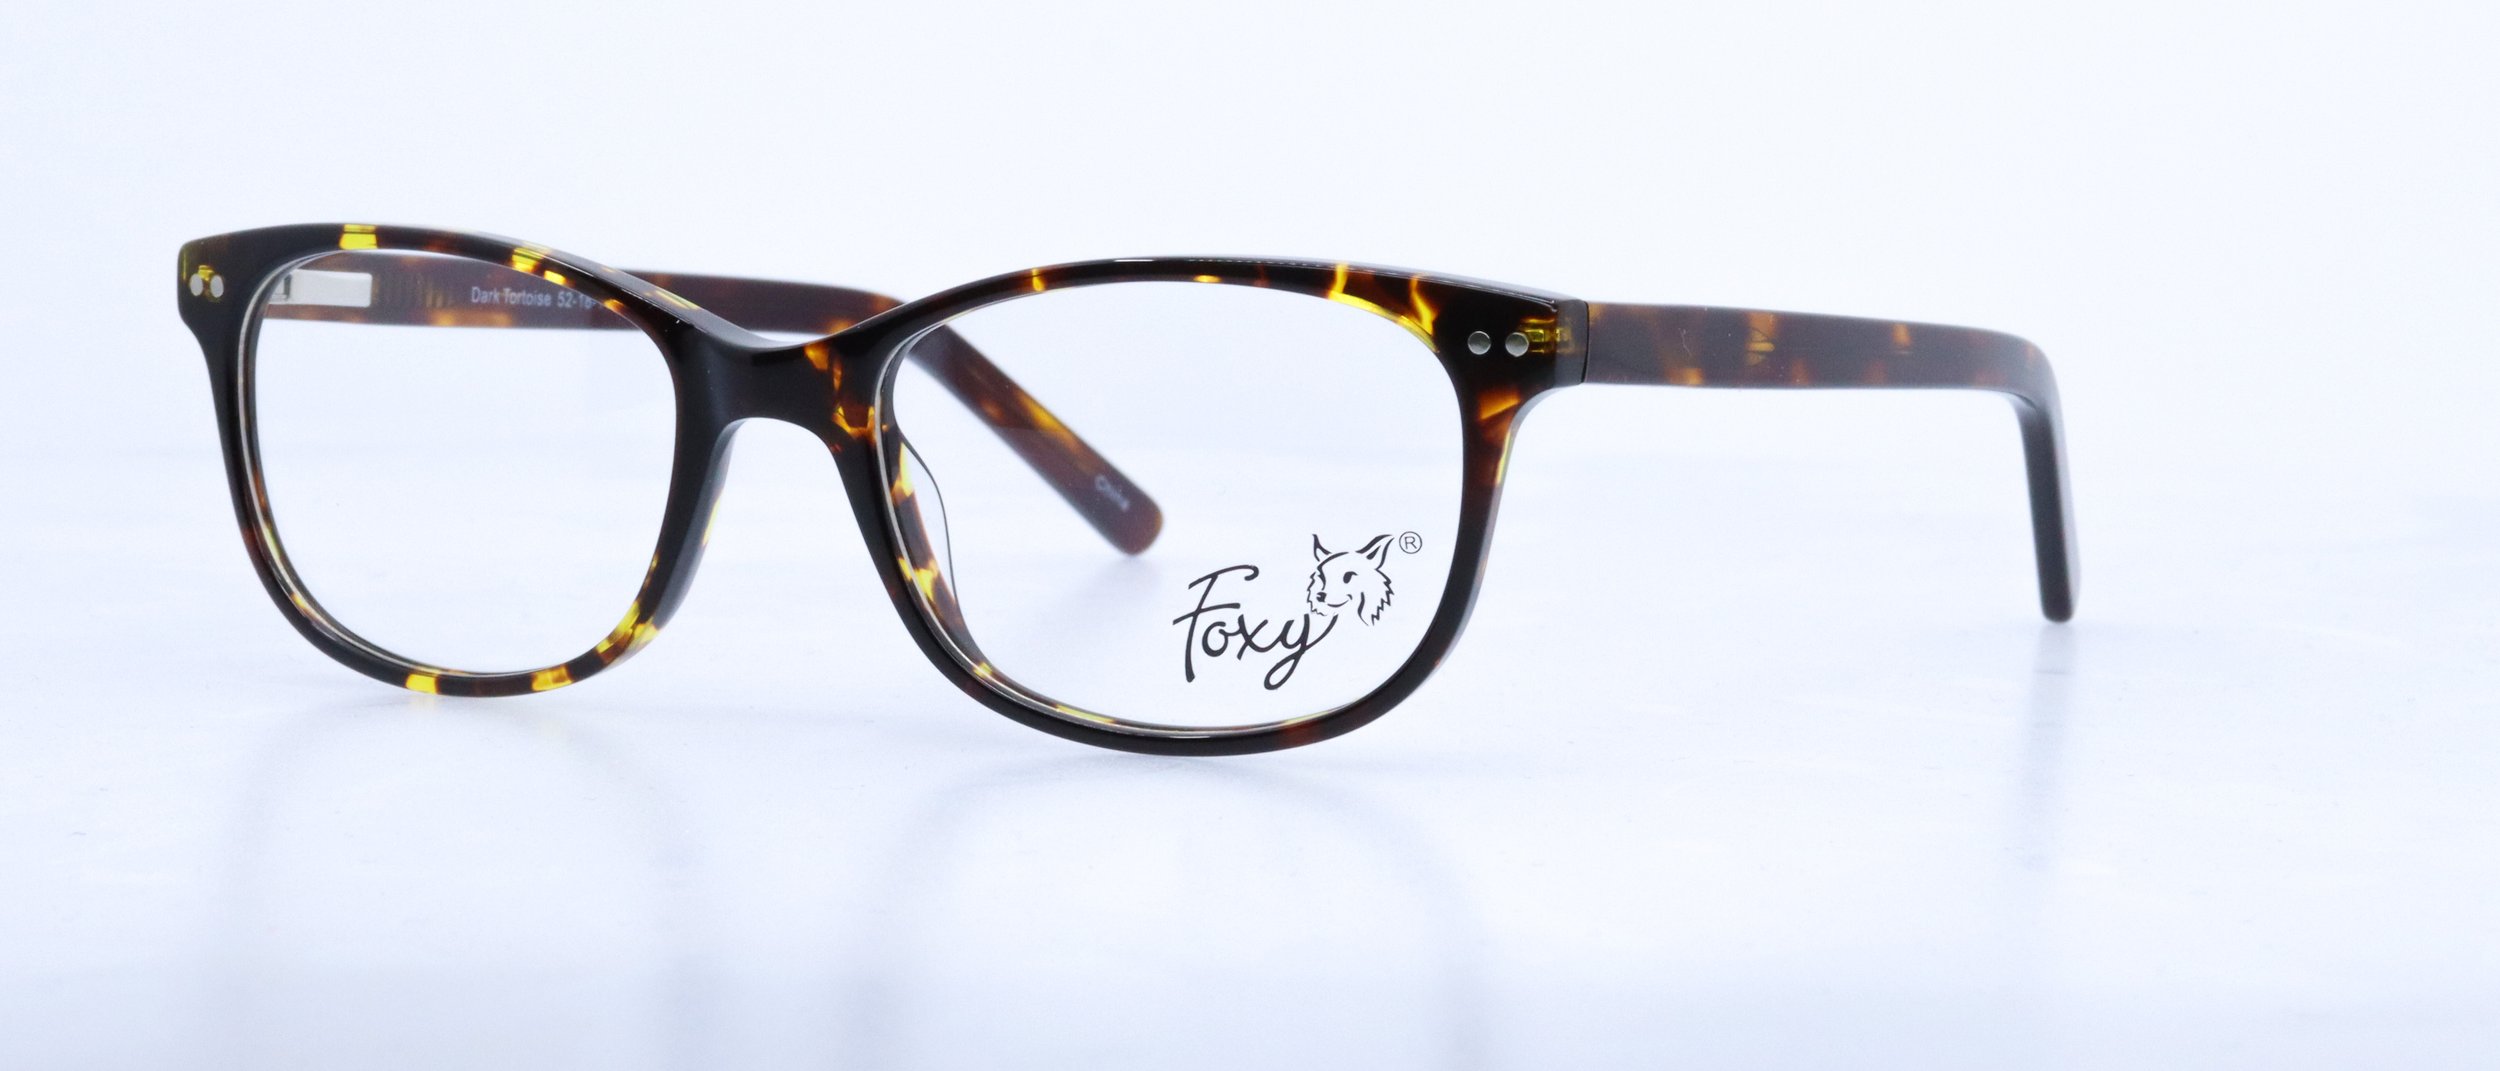  NEW COLOR!! Riley: 52-18-140, Available in Black/Green, Dark Tortoise, or Tortoise/Blue 